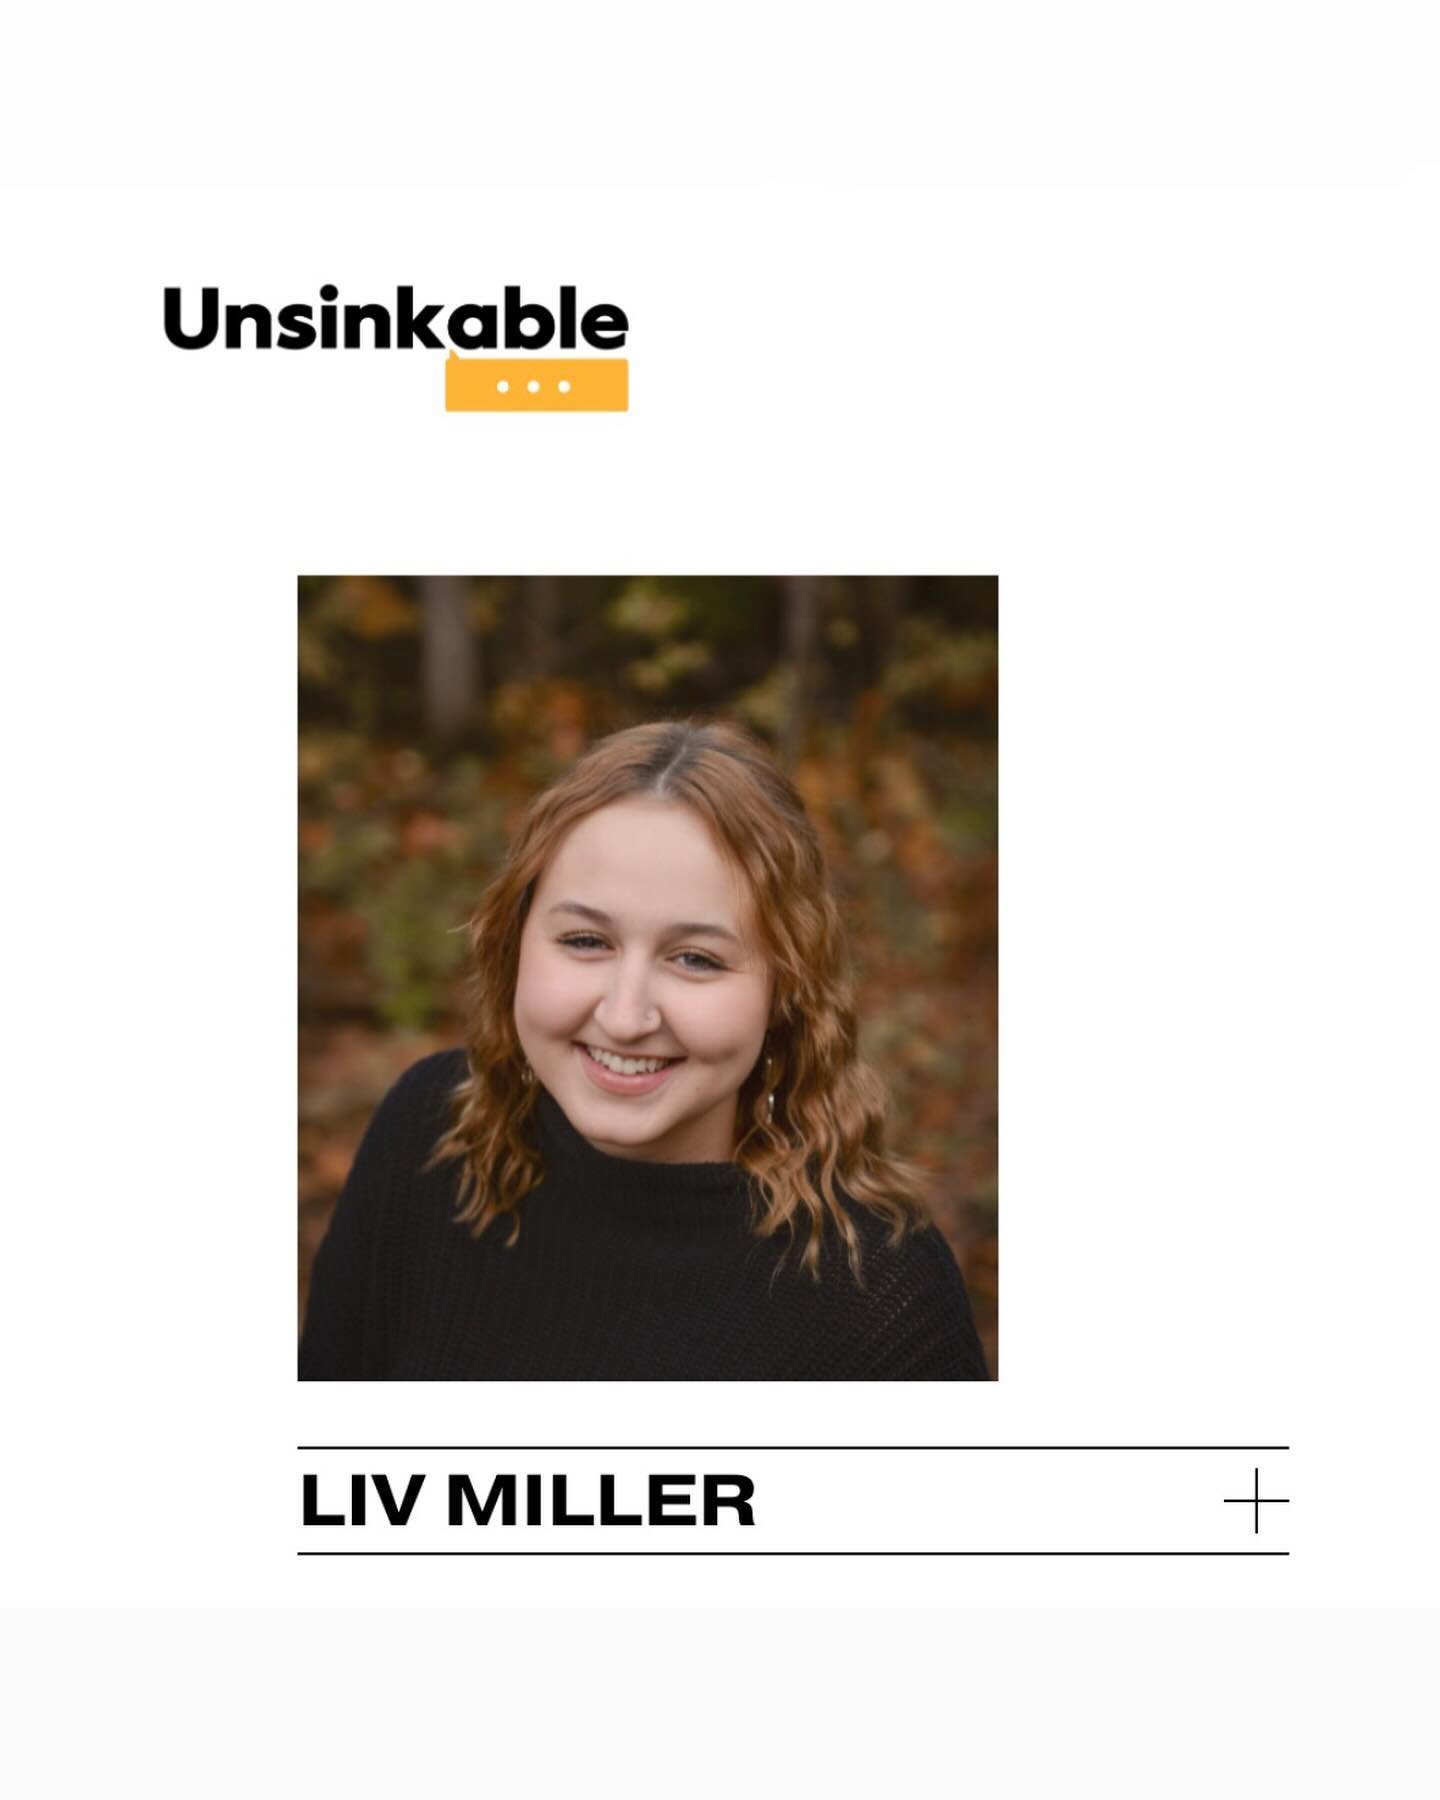 Very excited to be engaging with @beunsinkable this year as a Community Champion! 💪🏼💪🏼

I will be speaking for their Unsinkable @ Work offering during mental health week, alongside great company. Reach out to book a talk for your workplace! 💛

#